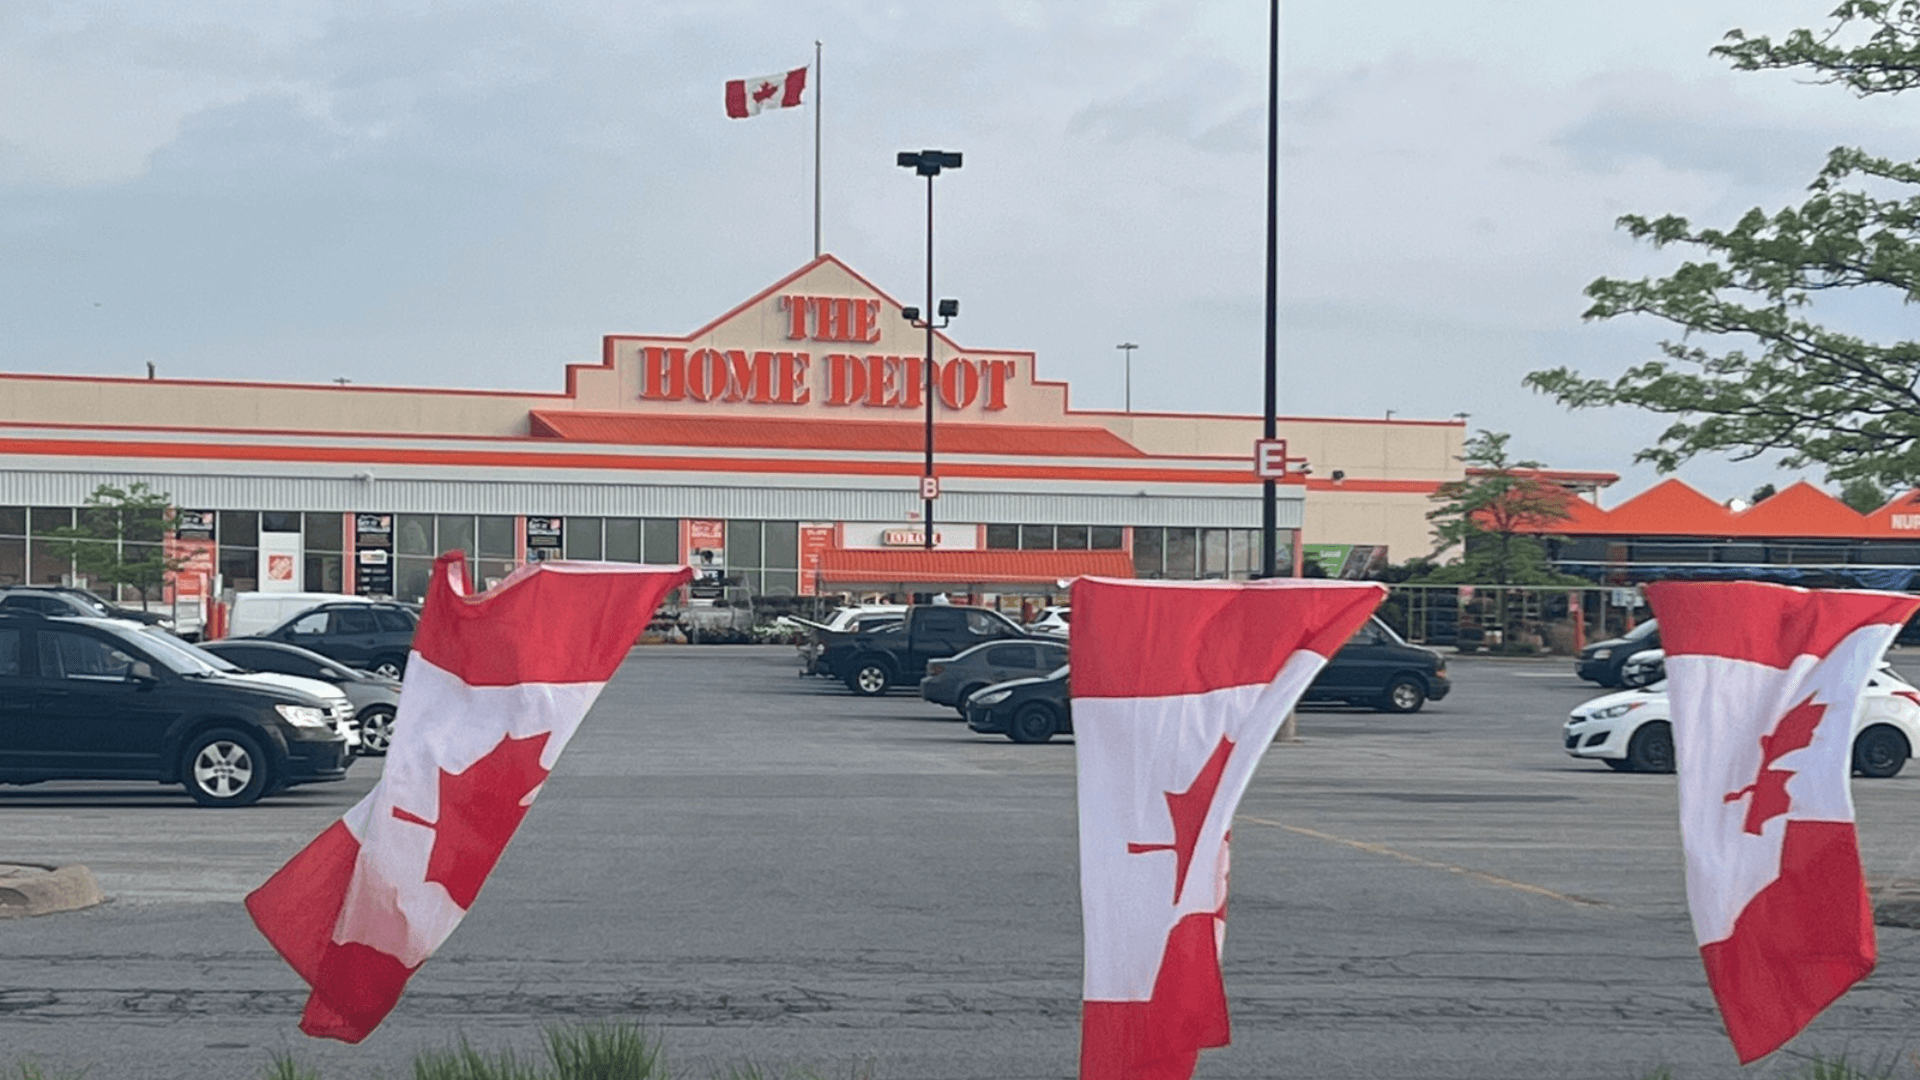 Home Depot overtakes Canadian Tire as base for 'anti-Trudeau